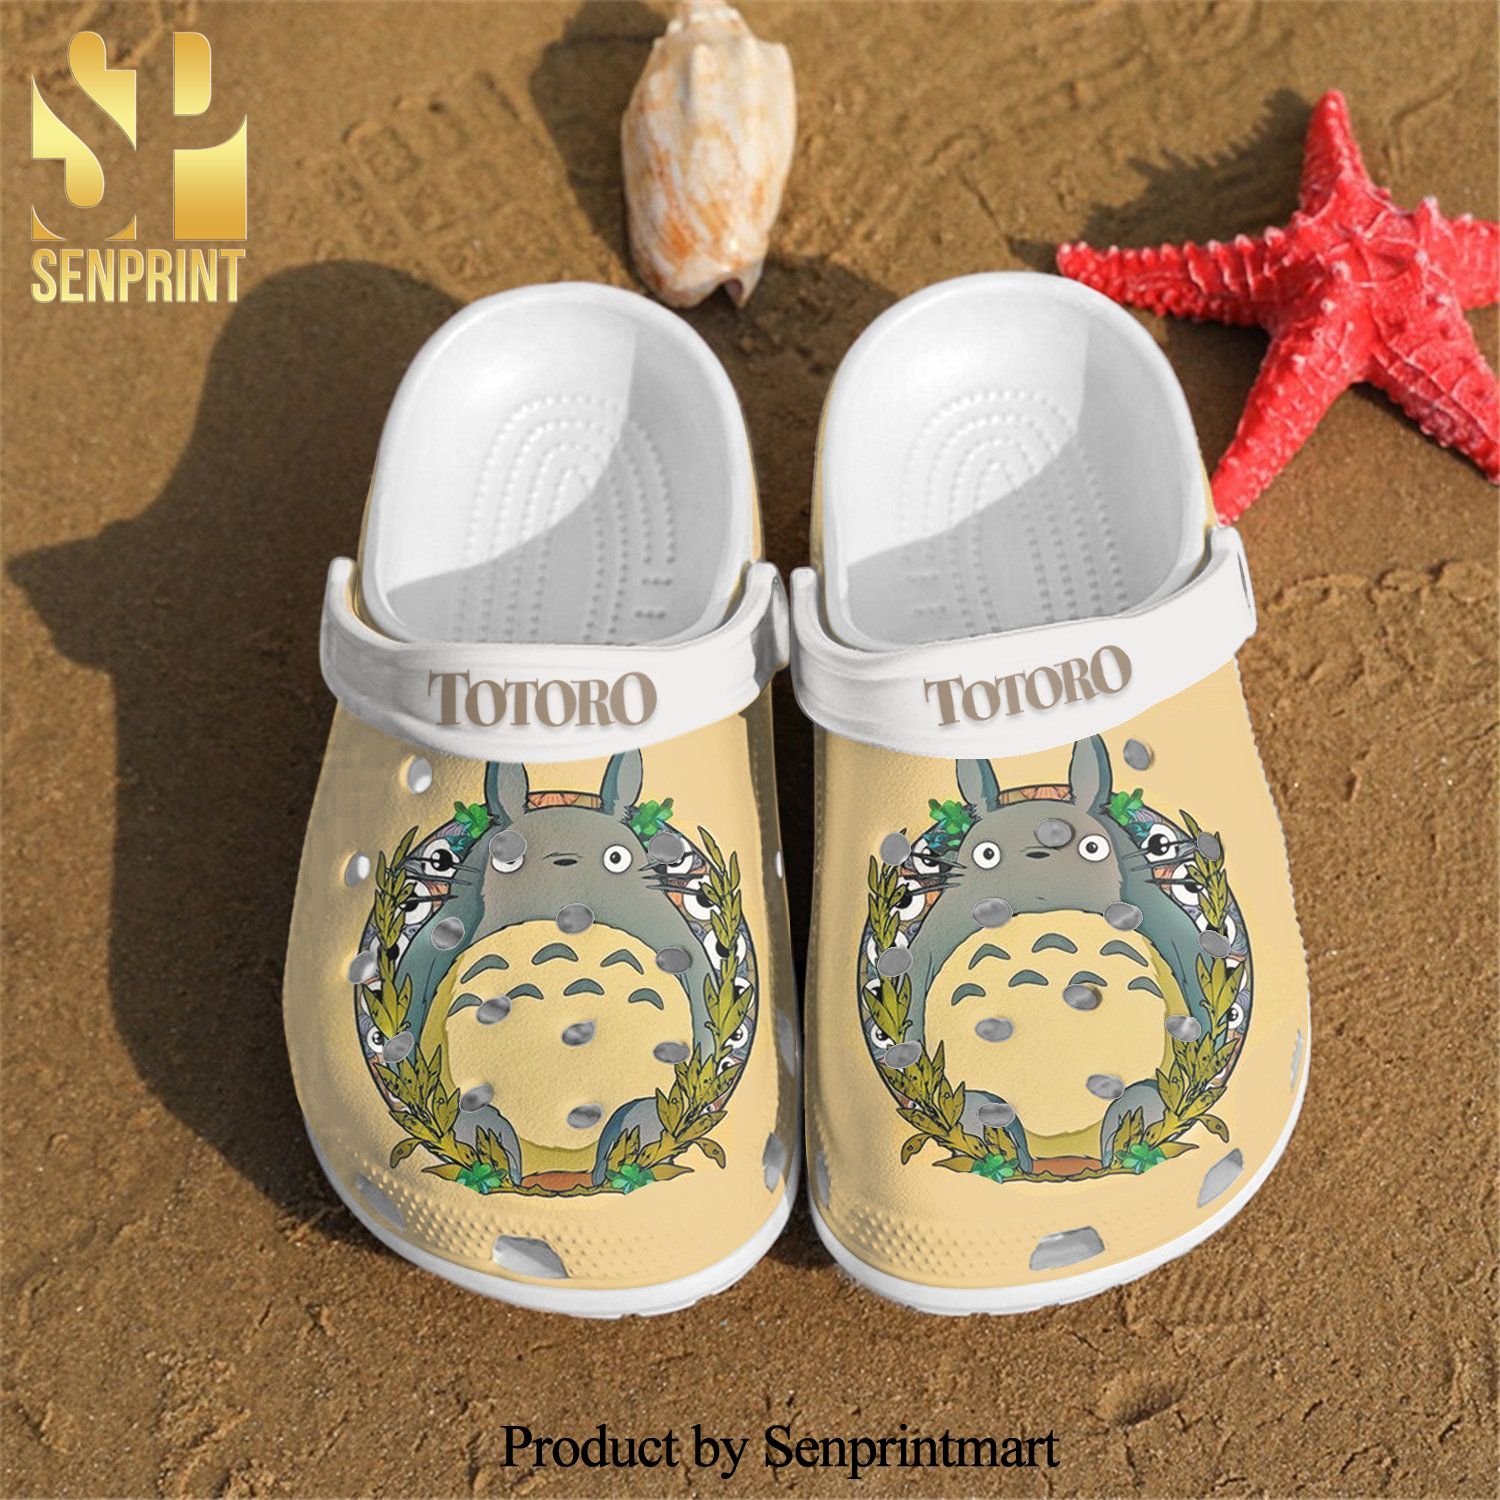 Totoro Rubber Crocs Crocband In Unisex Adult Shoes